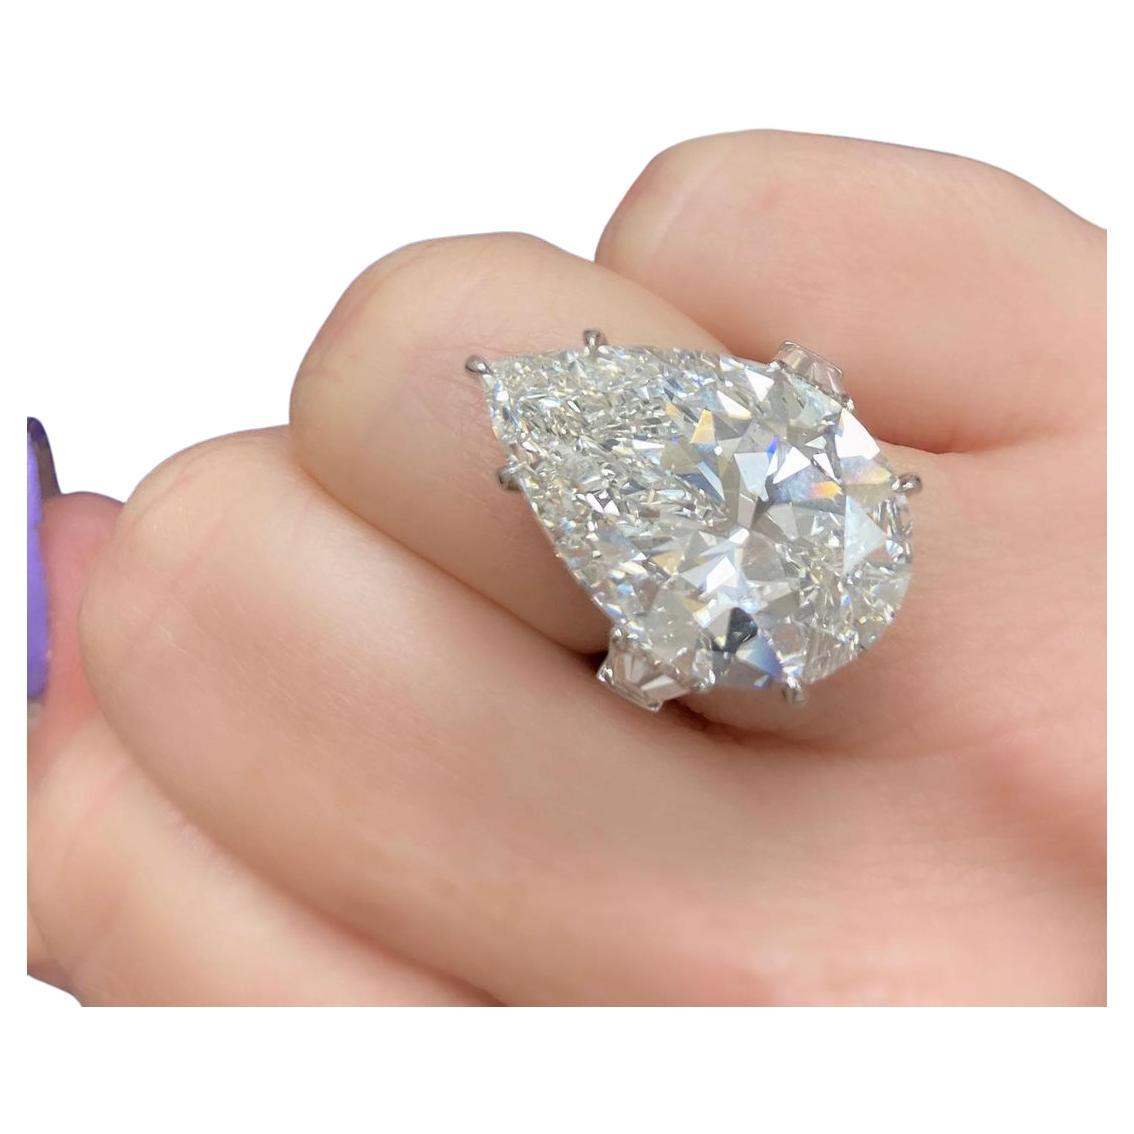 10 Carat Oval Diamond Ring | Read Before Buying